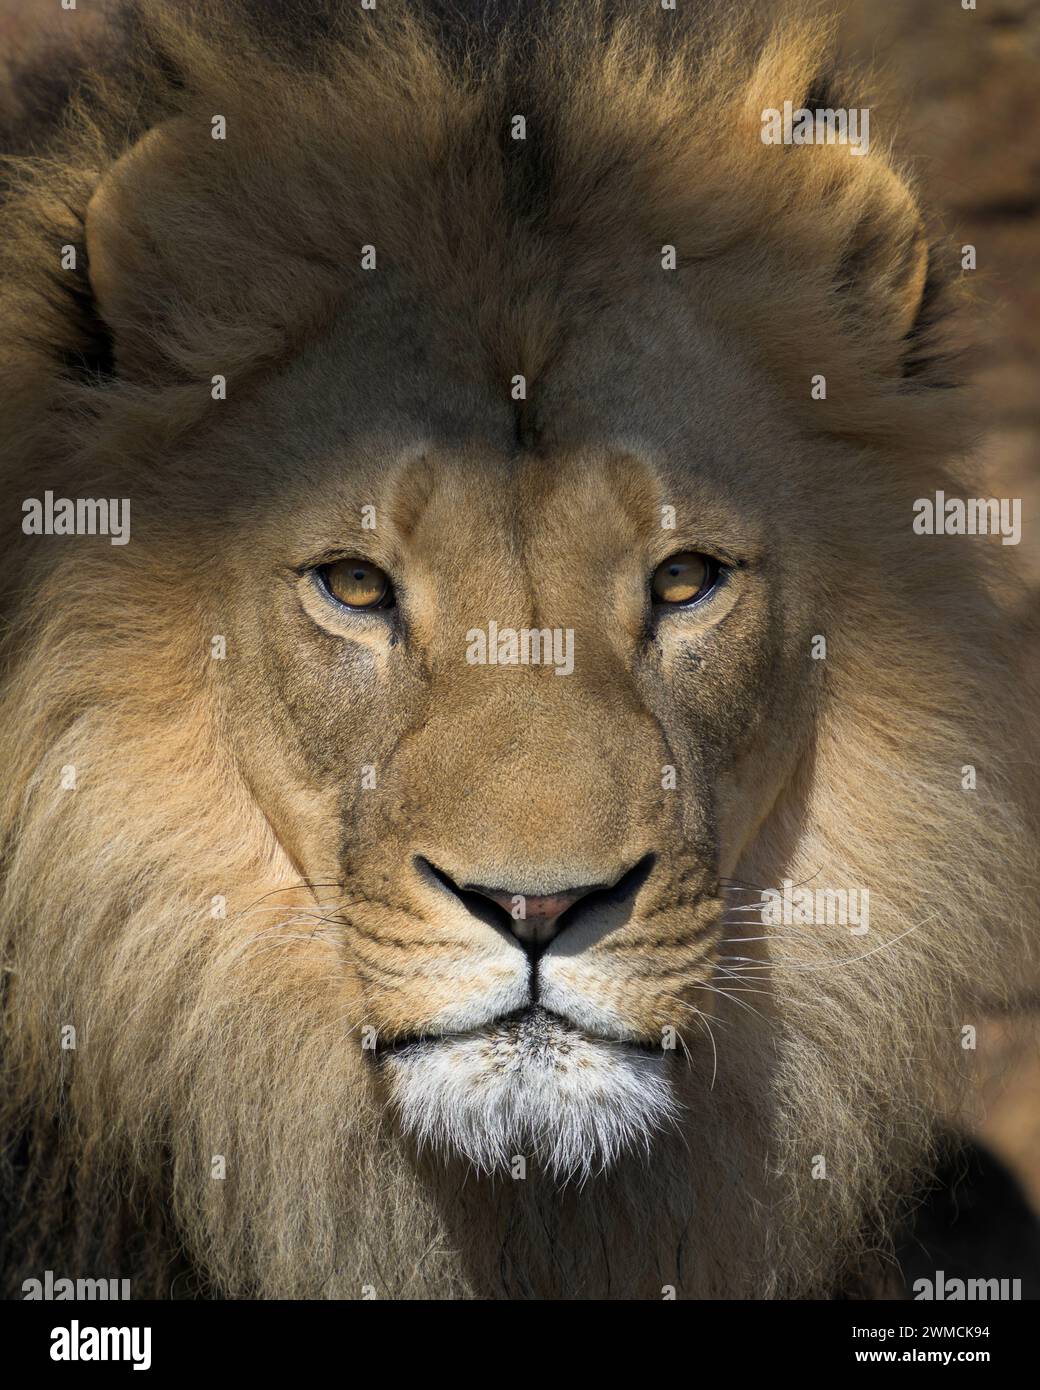 Male African lion (Panthera leo) closeup headshot with intense stare in warm lighting Stock Photo